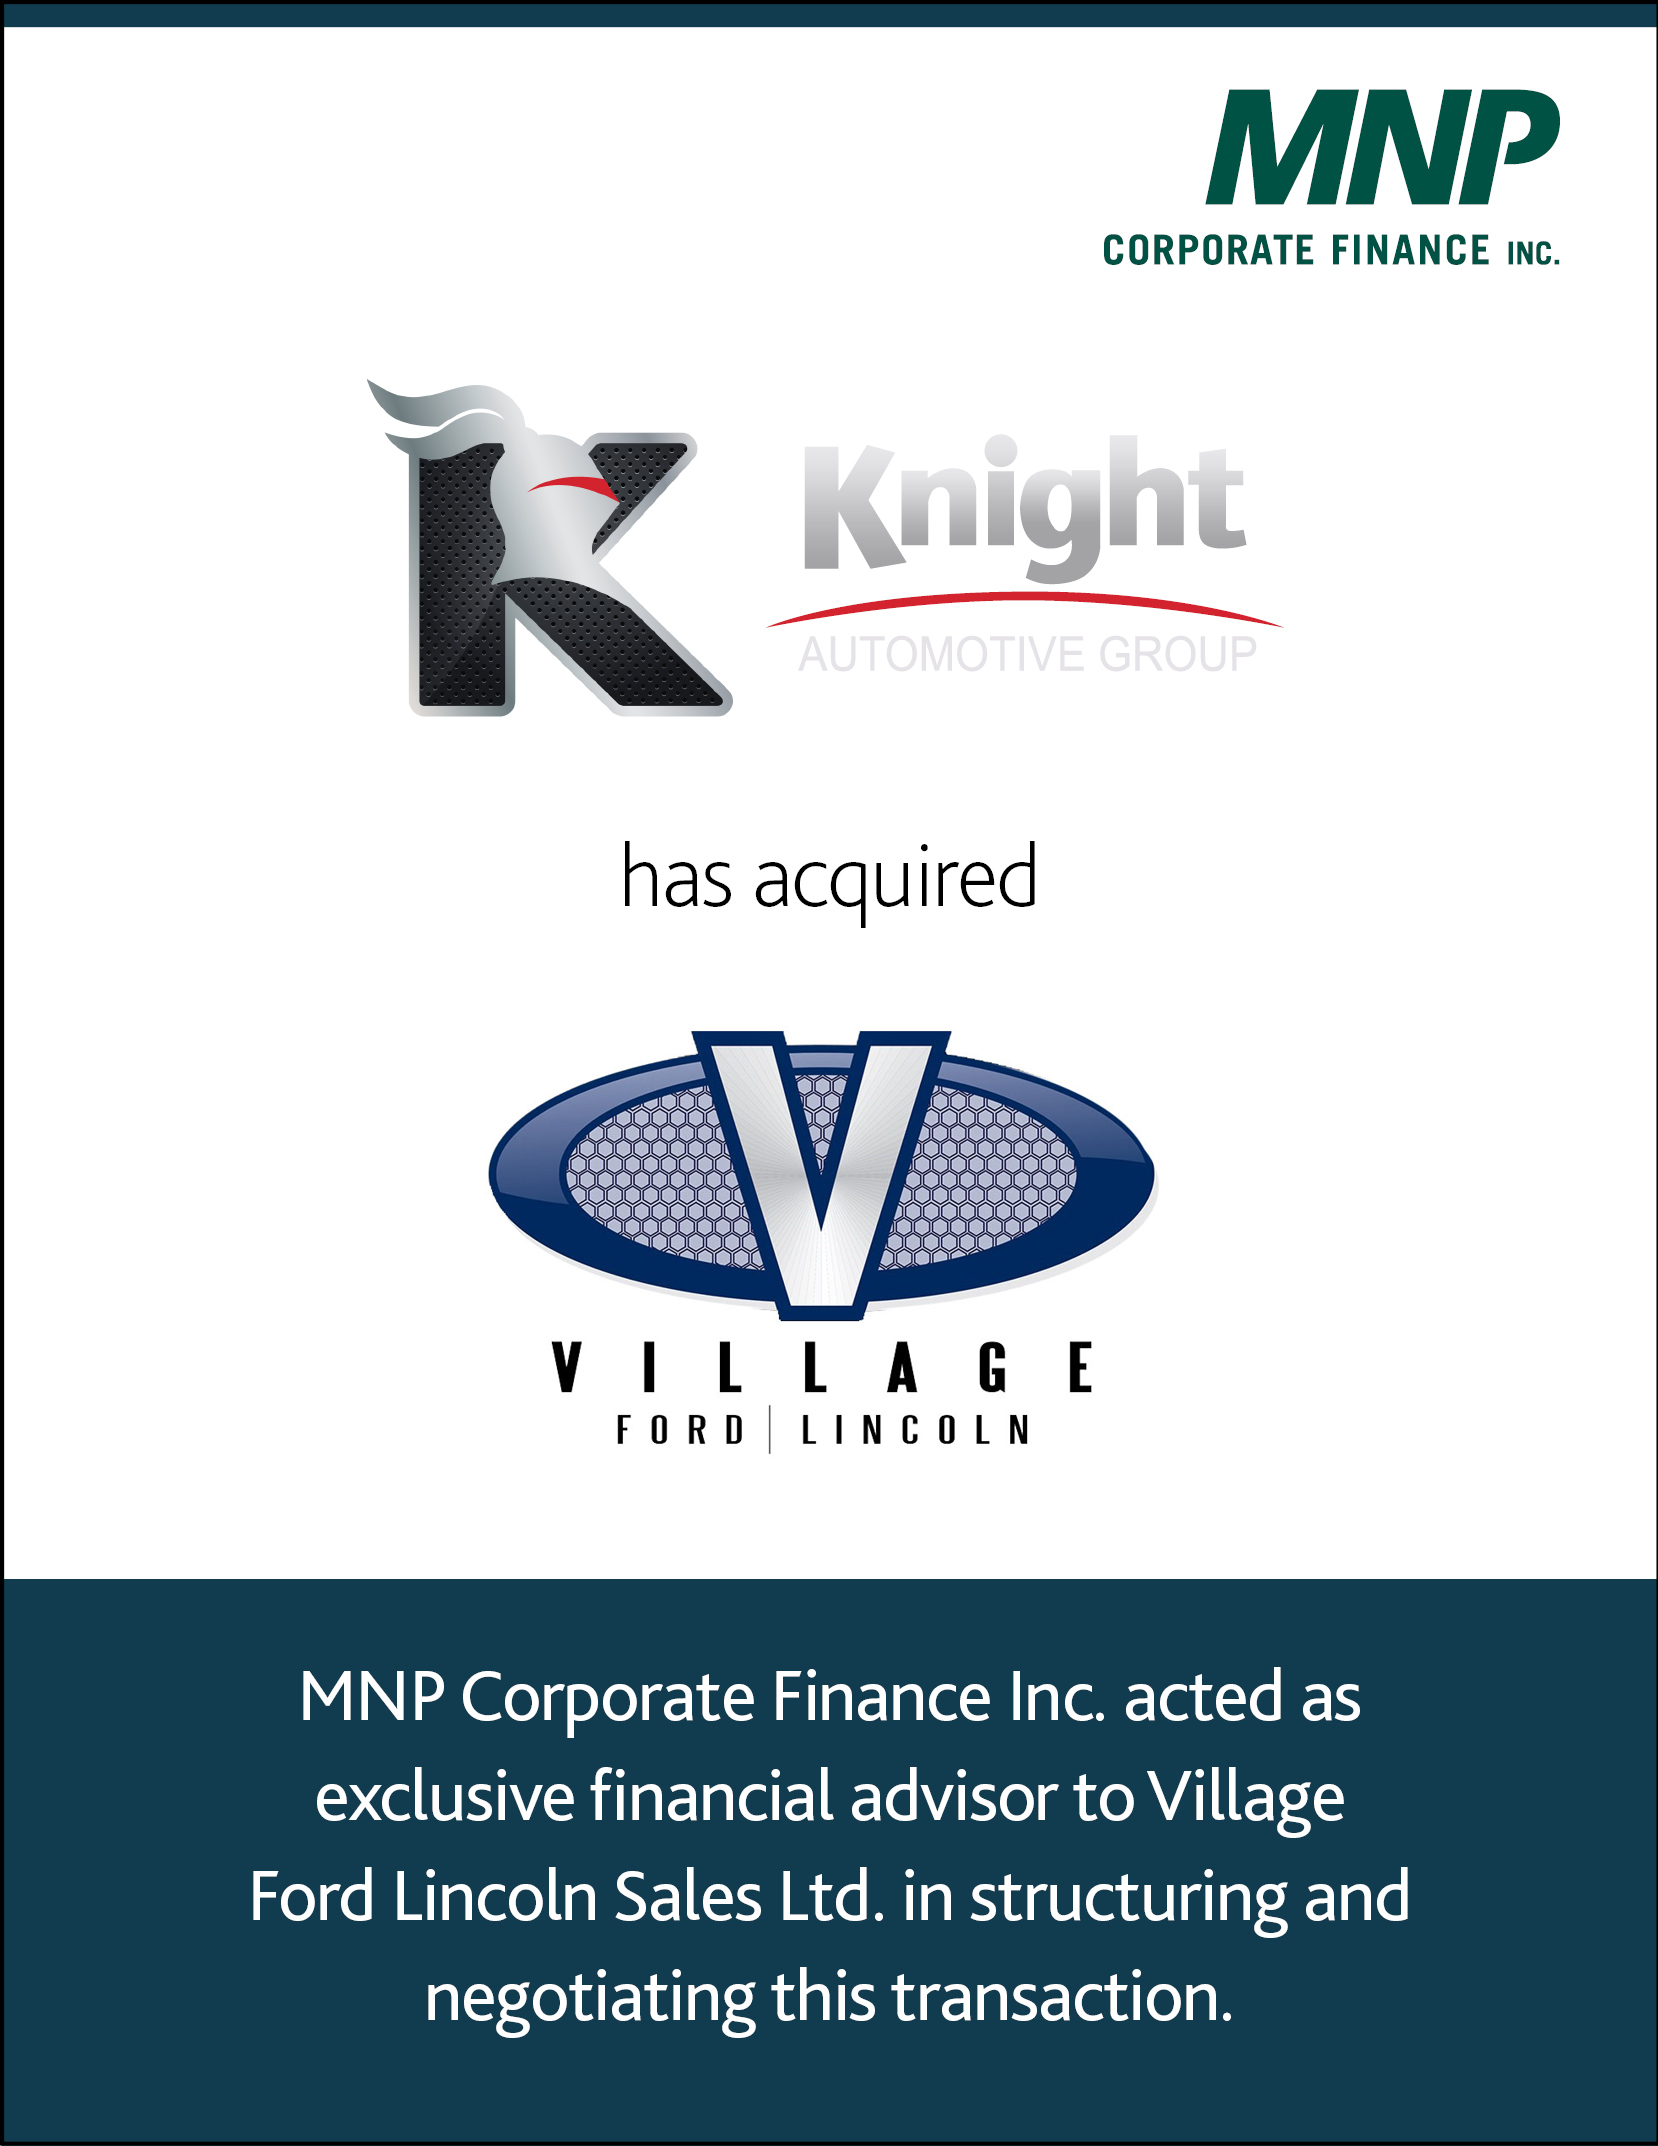 Knight Automotive Group has acquired Village Ford Lincoln Sales Ltd.